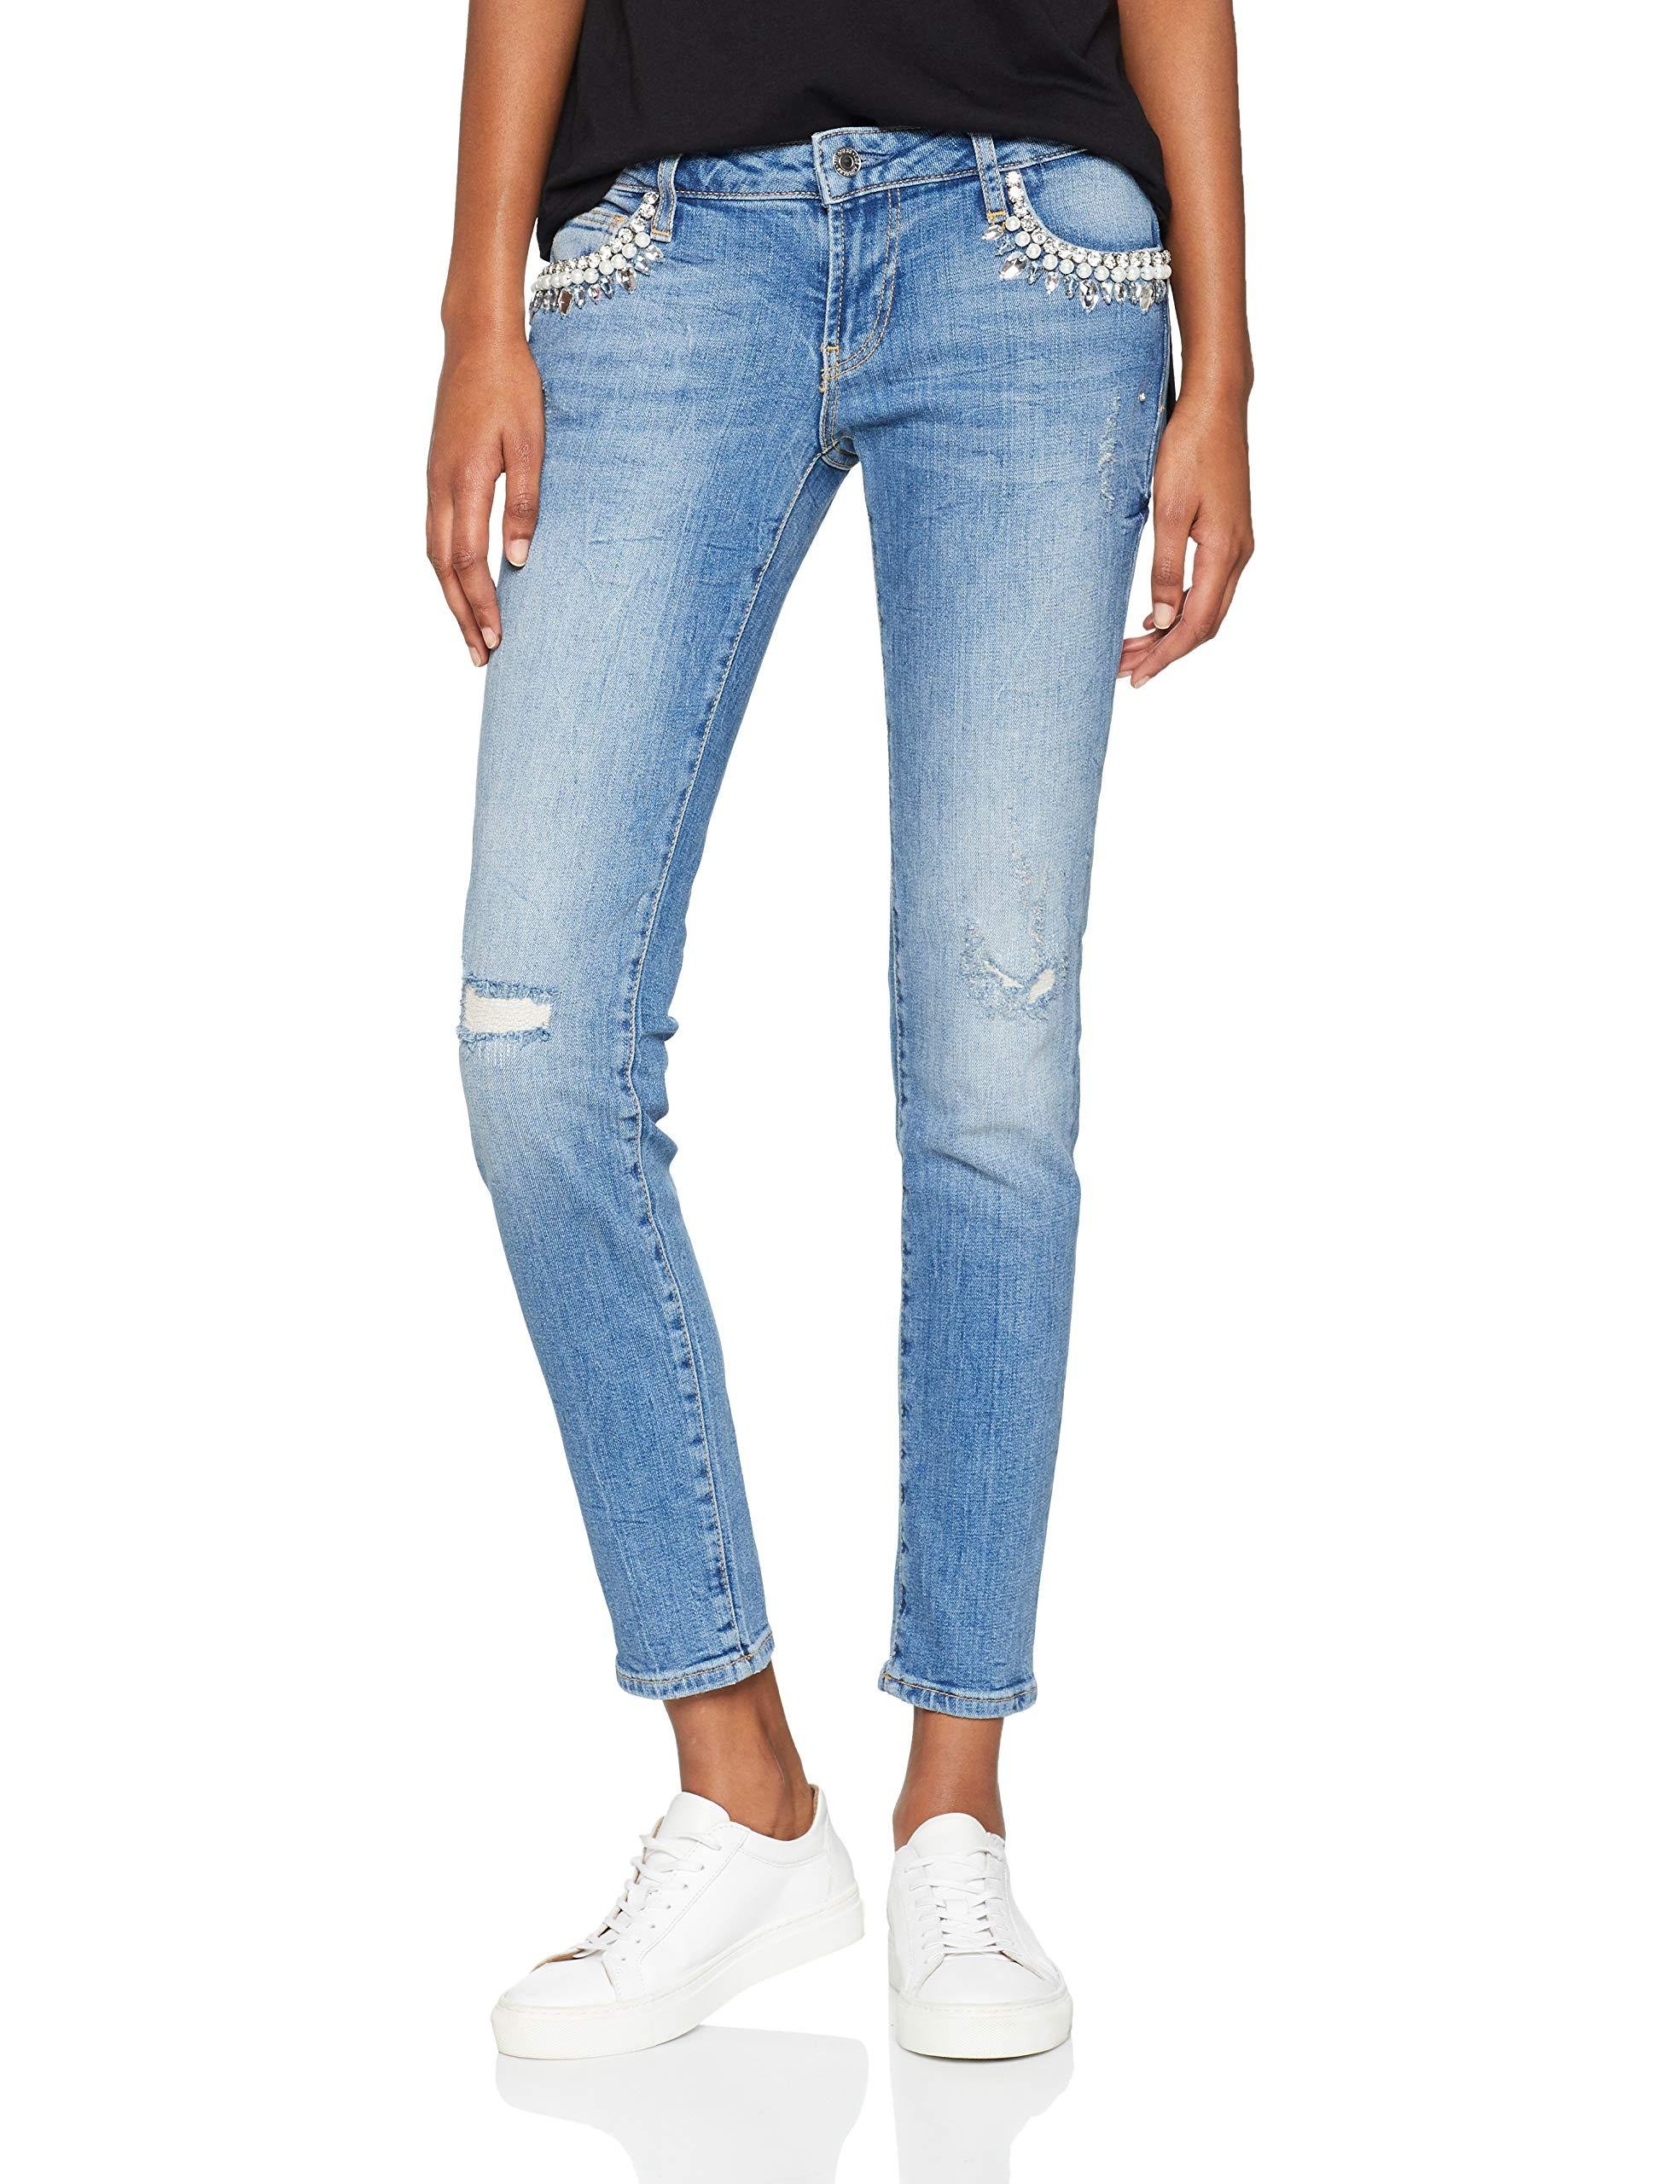 Guess Denim Beverly Skinny Jeans in Blue - Lyst